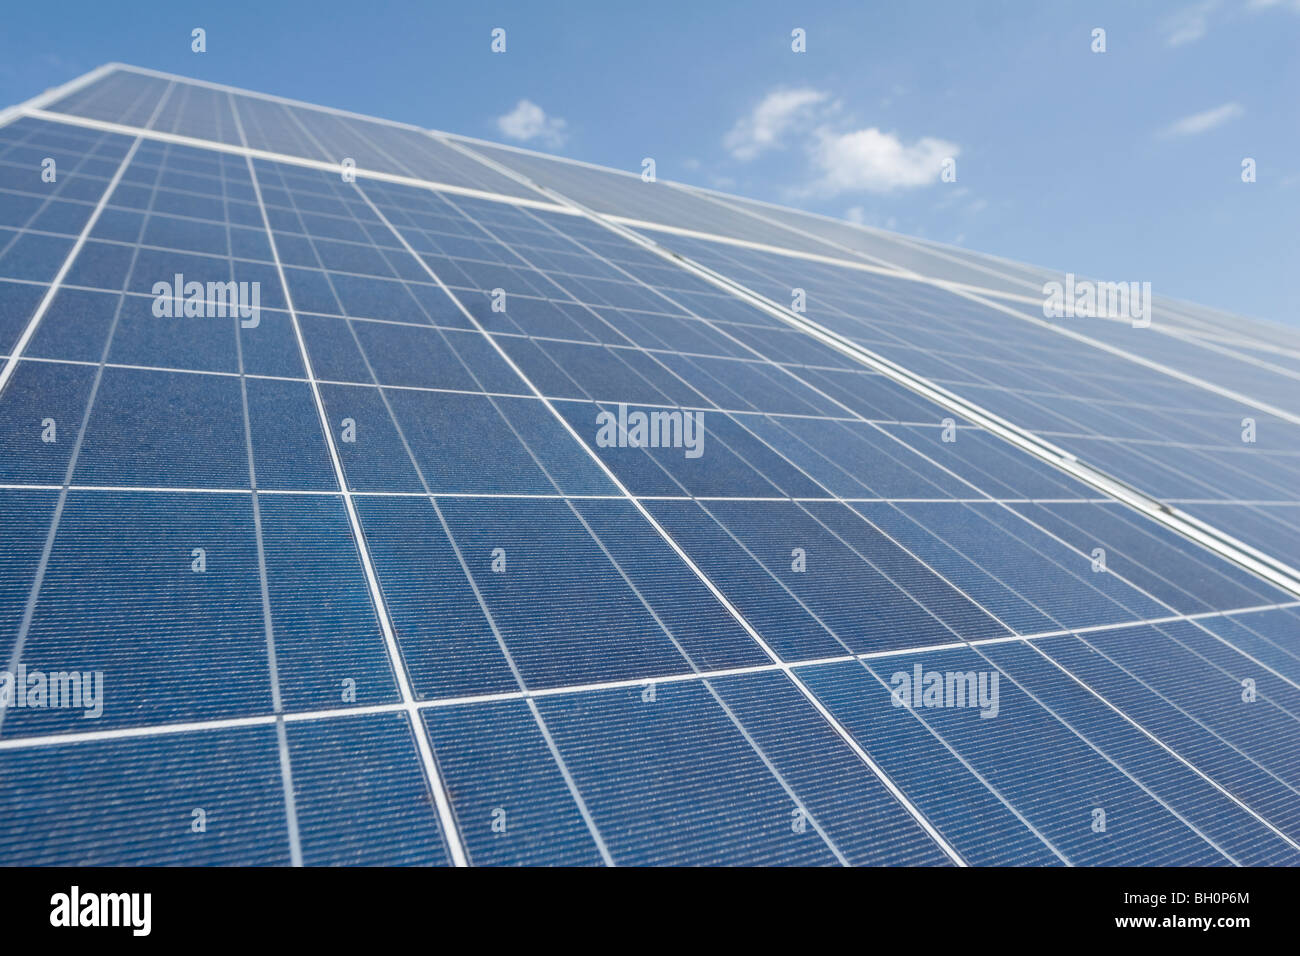 Solar panels used as part of a large scale renewable energy plant, Apulia, Italy Stock Photo